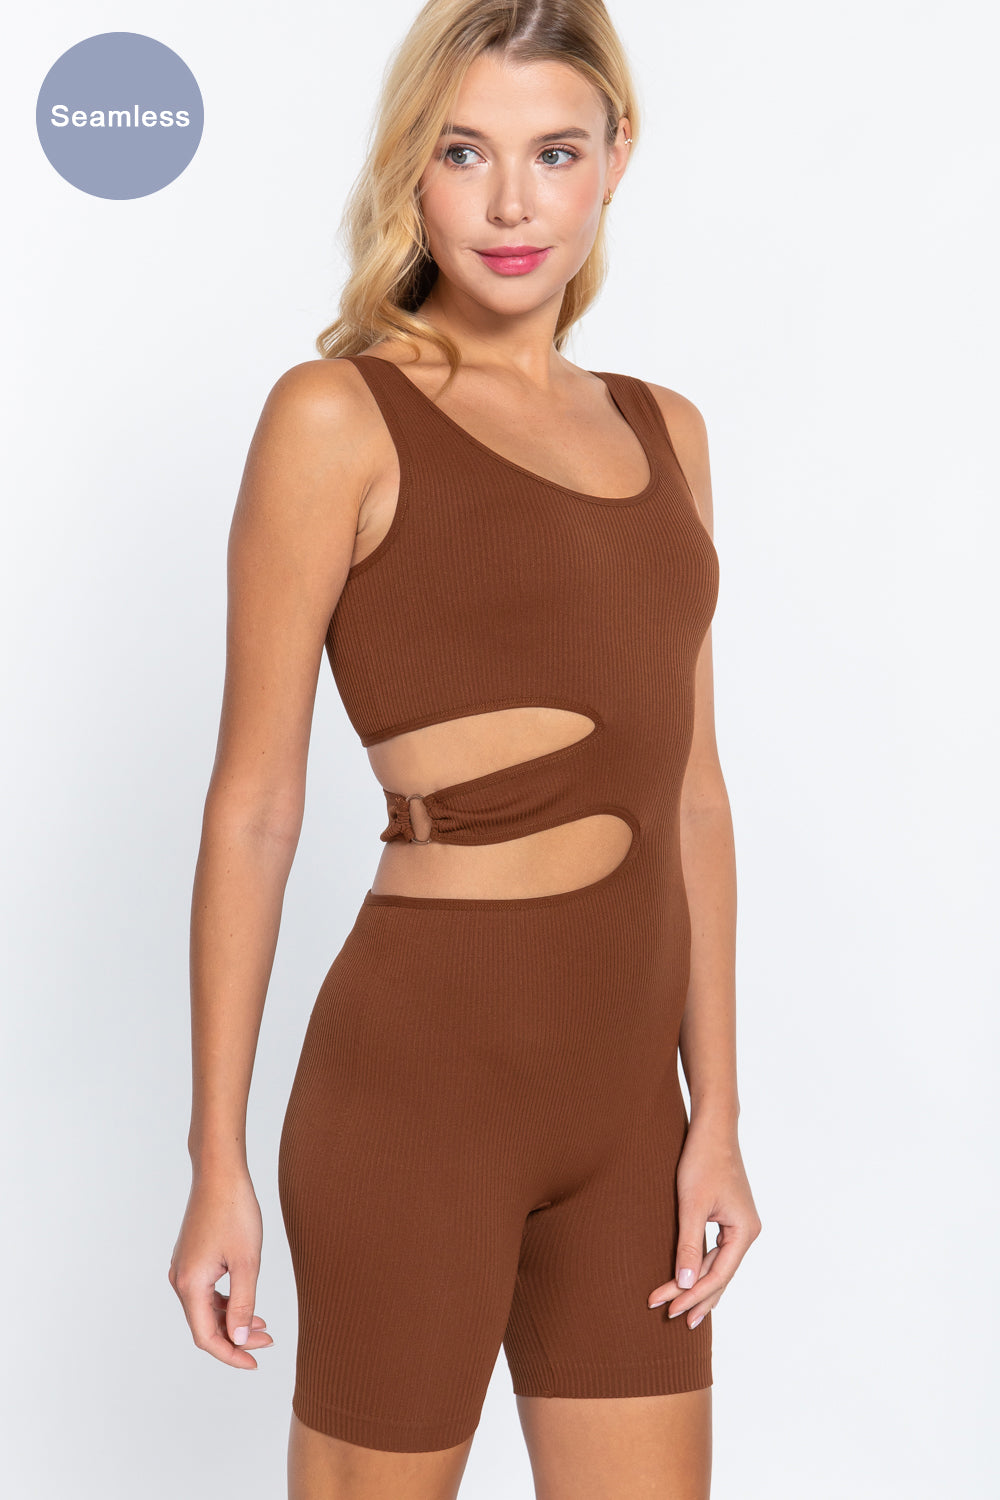 Tank tops Suave Cut-out Seamless Coffee Romper Jumpsuits & Rompers jehouze 